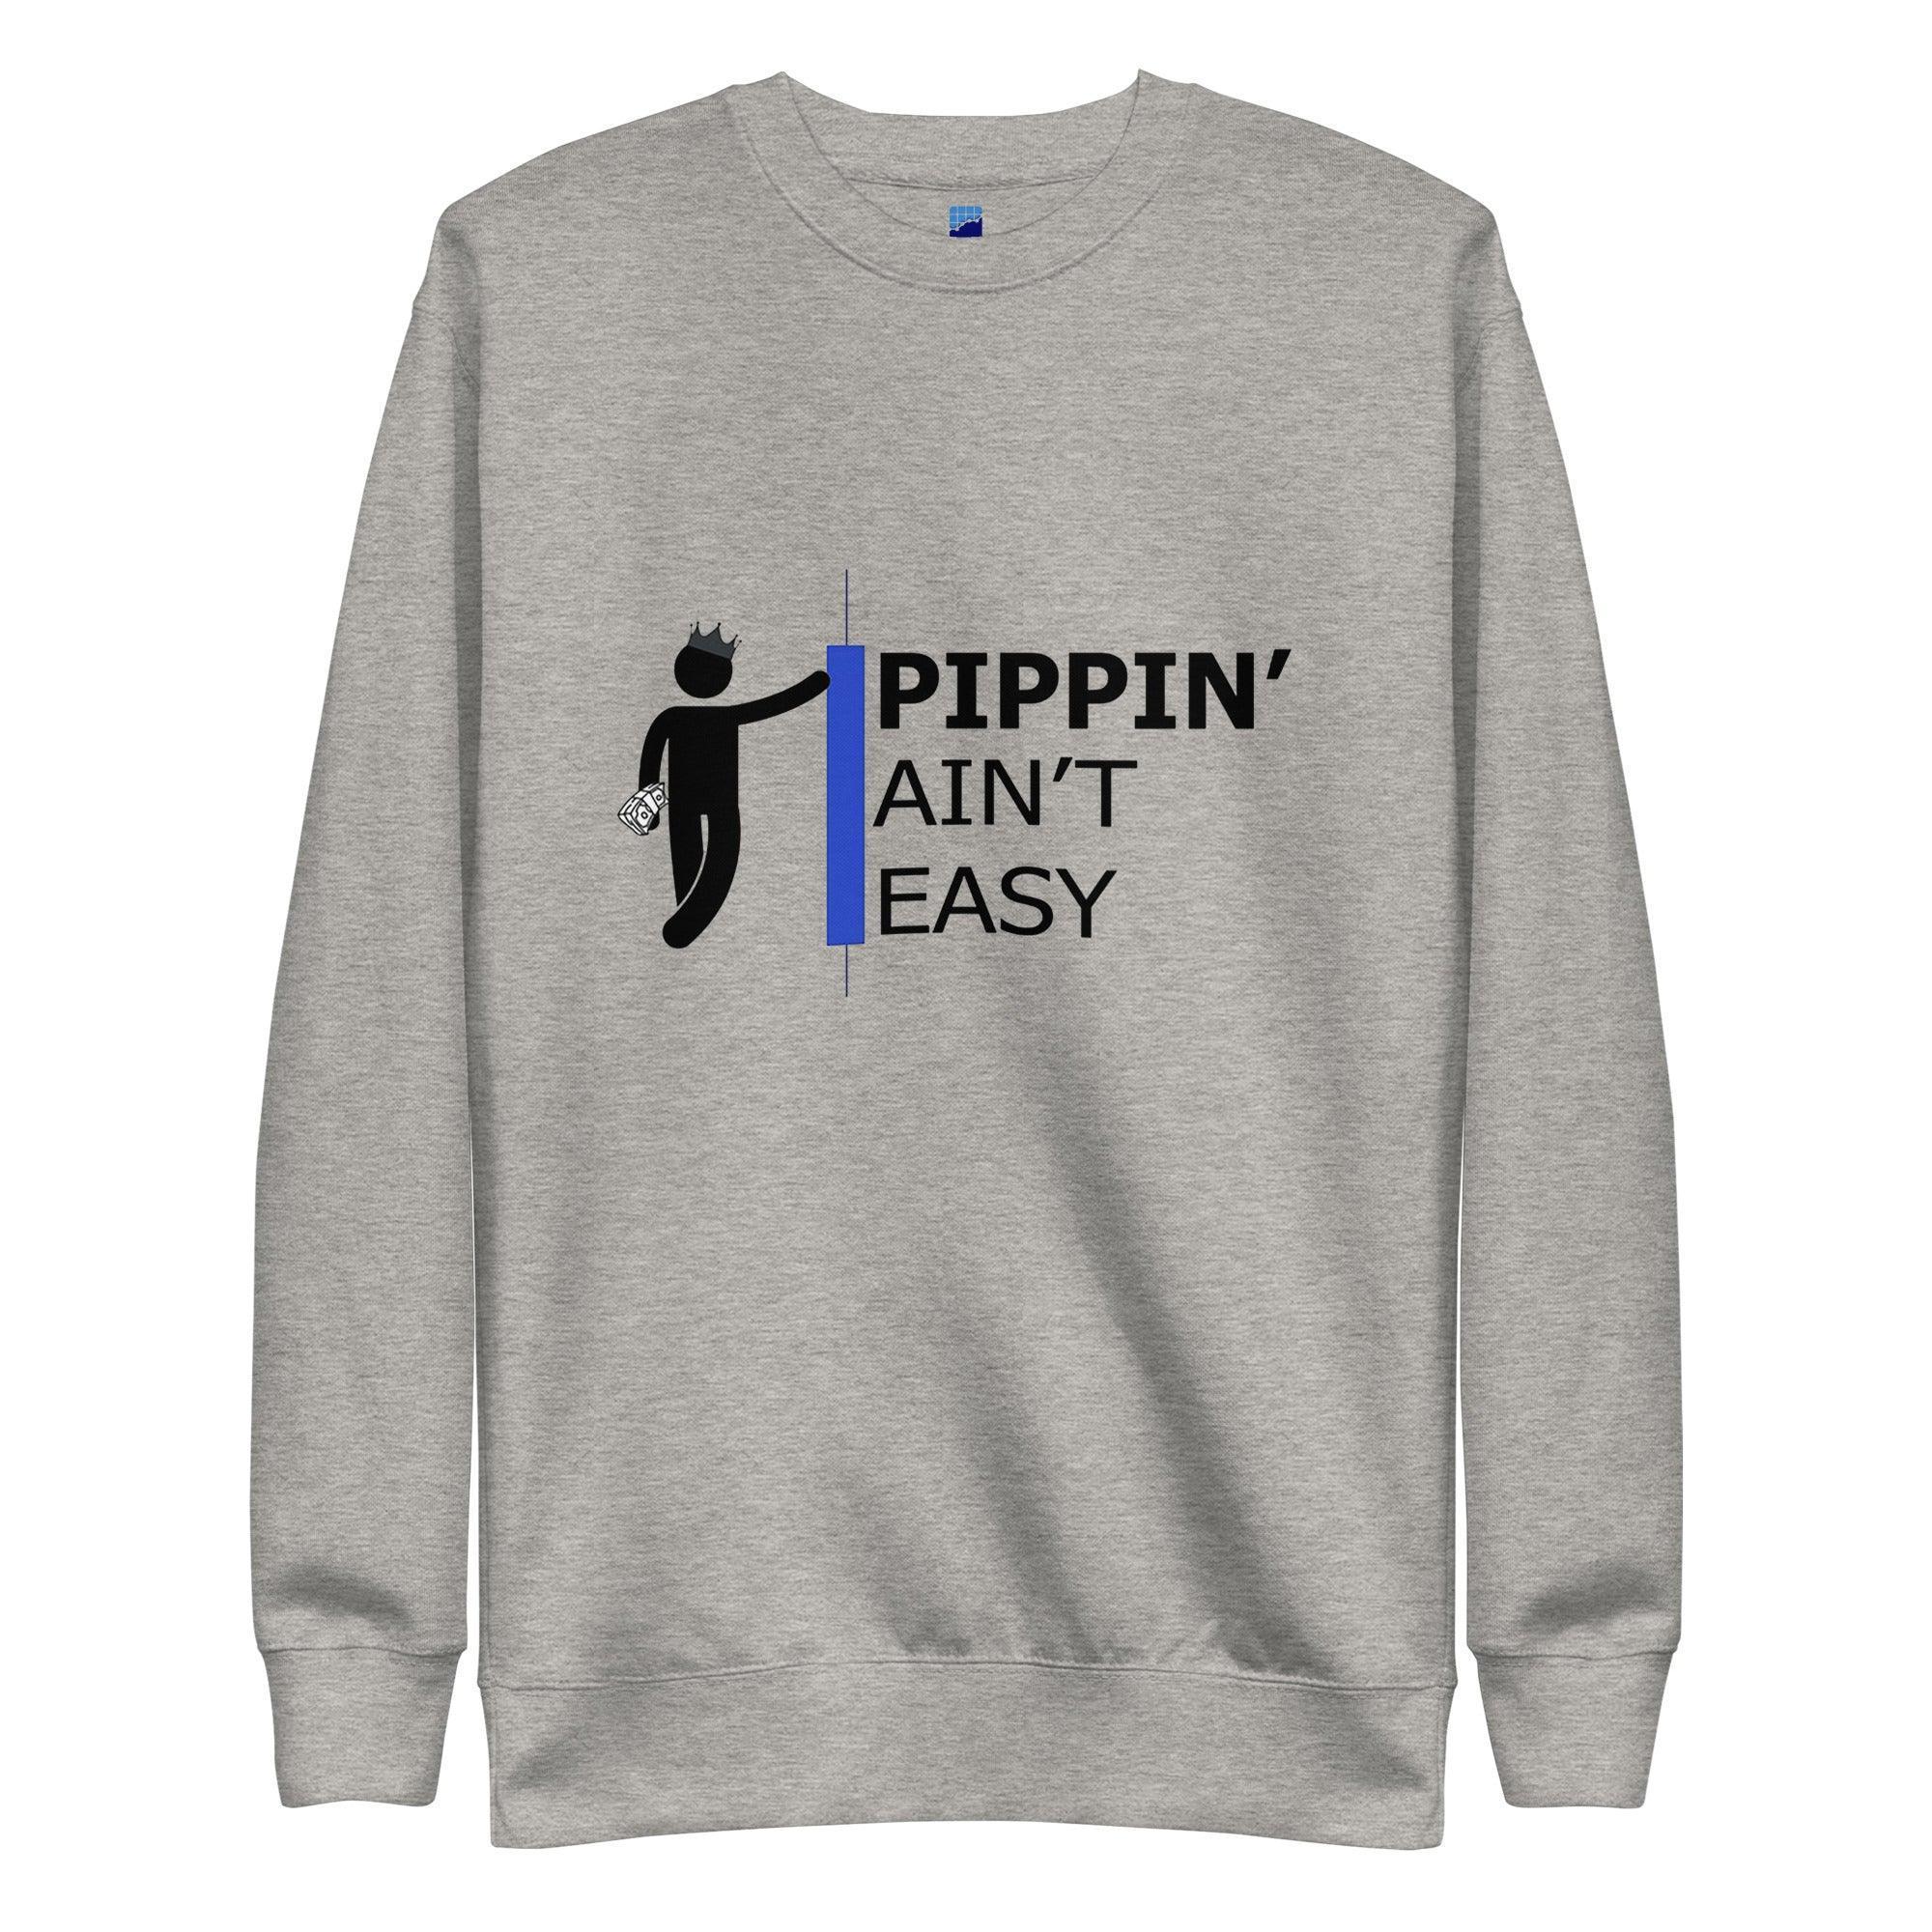 Pippin Ain't Easy Sweatshirt - InvestmenTees